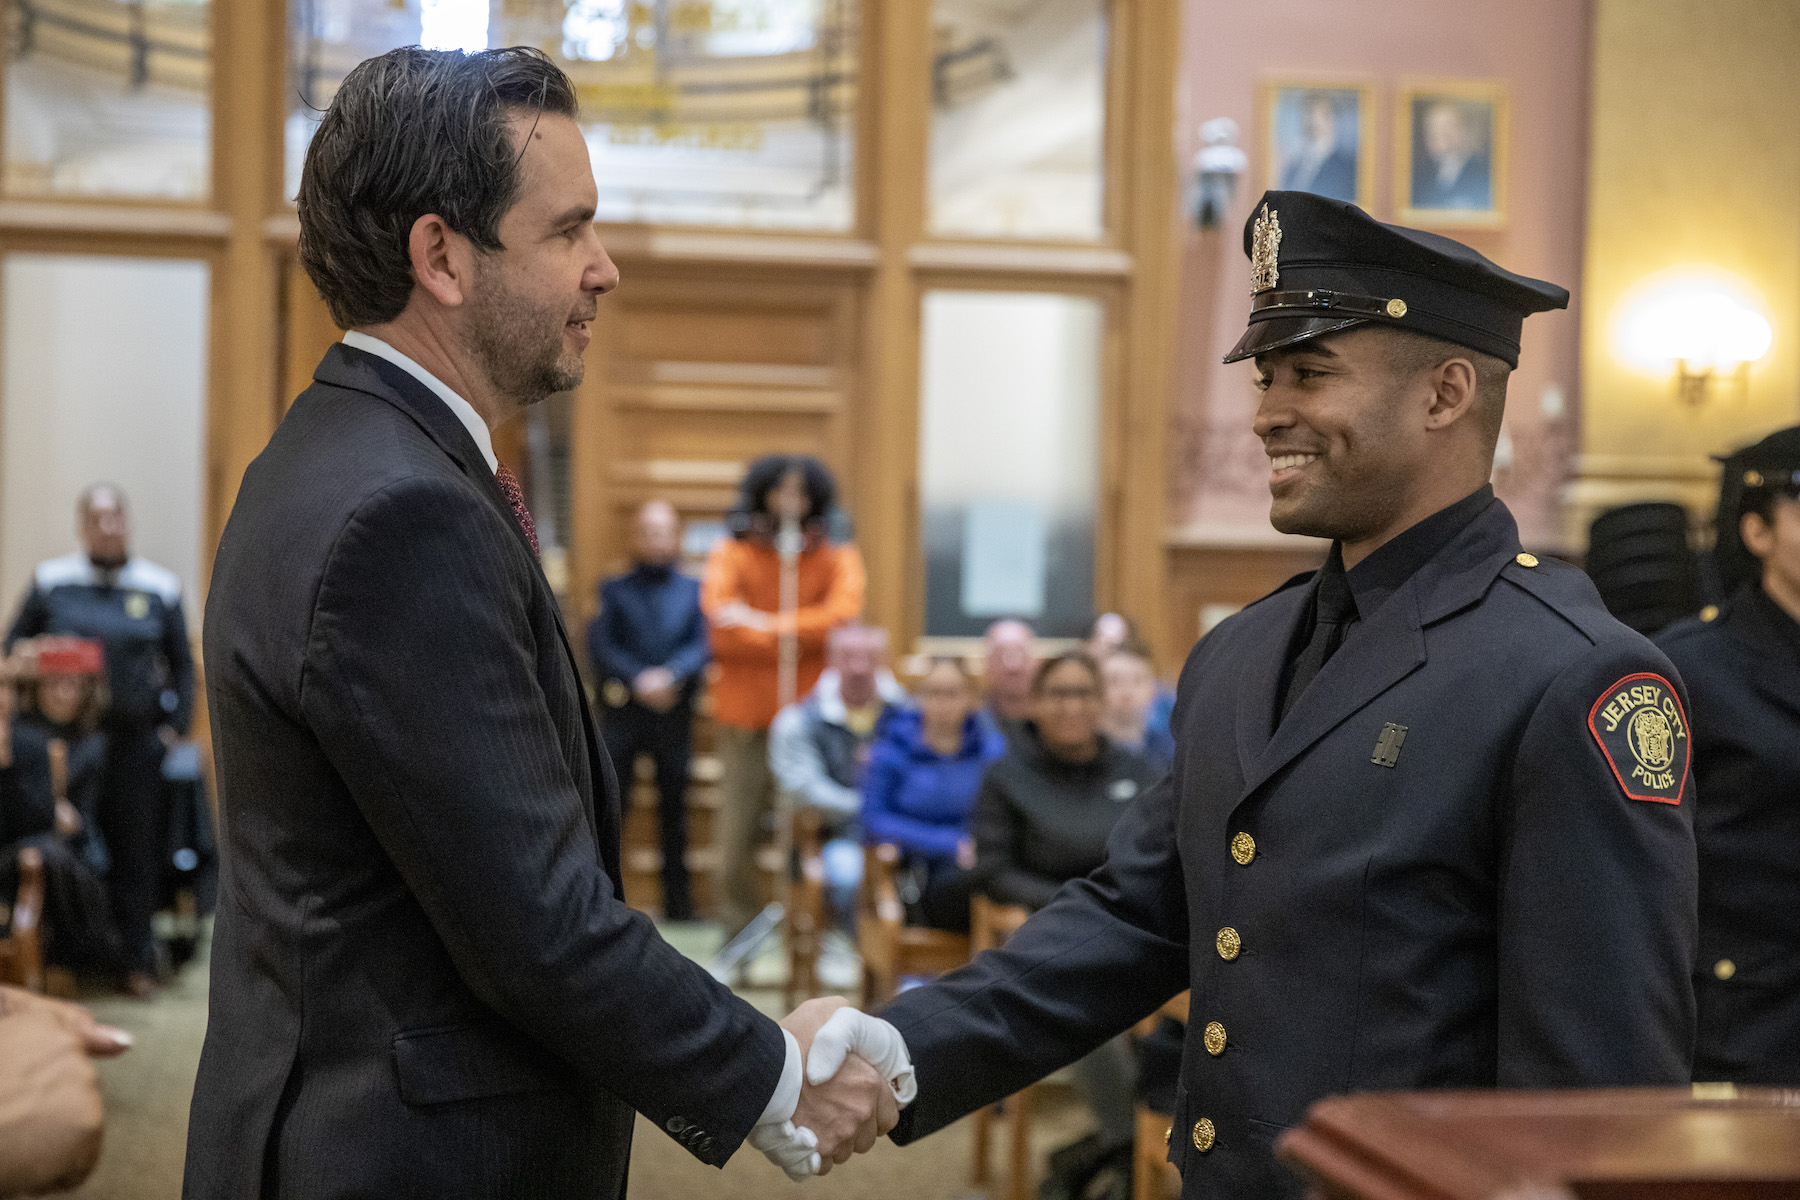 Mayor Fulop Gives Oaths to Newest JCPD Officers, Over 90% Represent Minority Populations